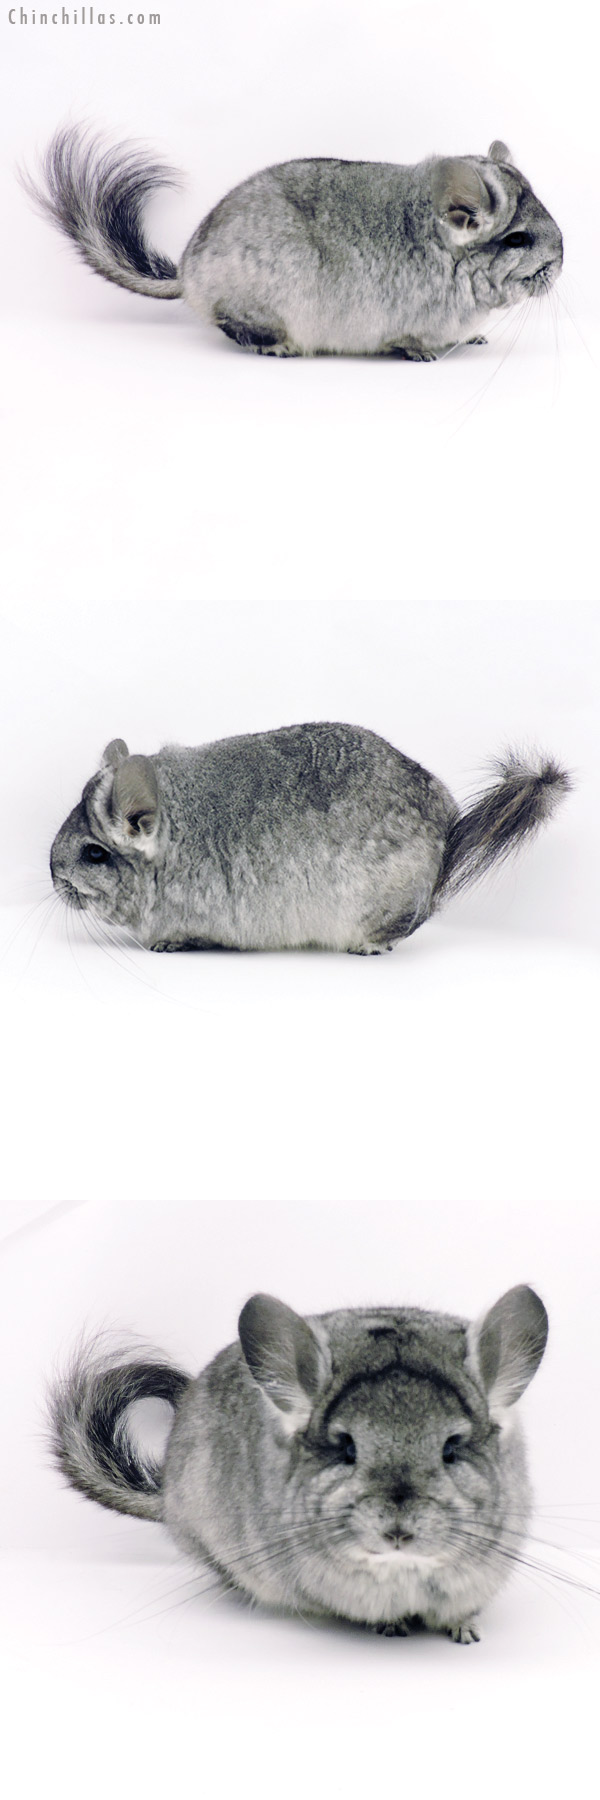 Chinchilla or related item offered for sale or export on Chinchillas.com - 19331 Blocky Brevi Type Standard  Royal Persian Angora Female Chinchilla